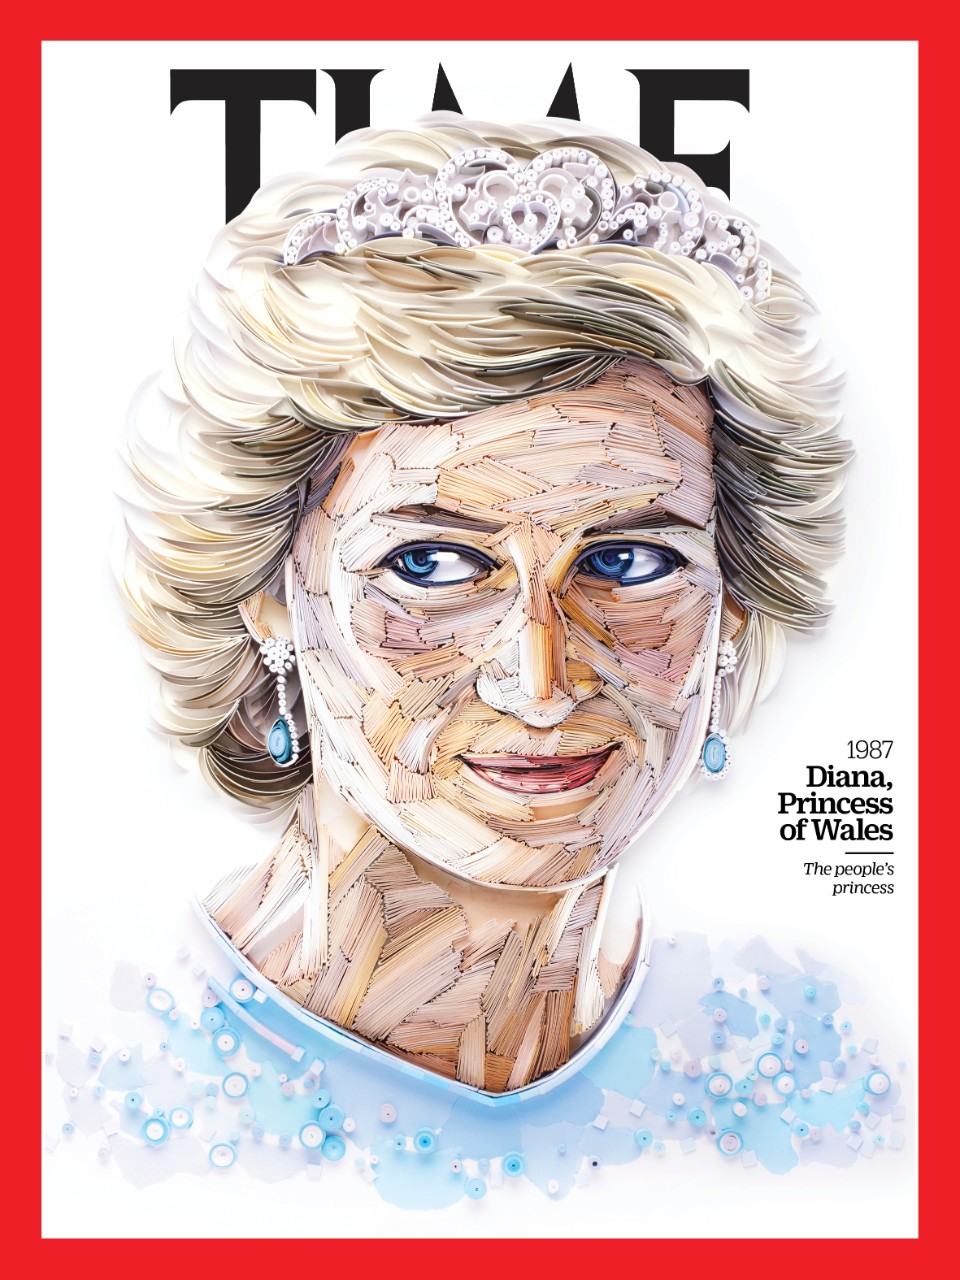 TIME magazine cover featuring a portrait of Diana, Princess of Wales, created via quilling